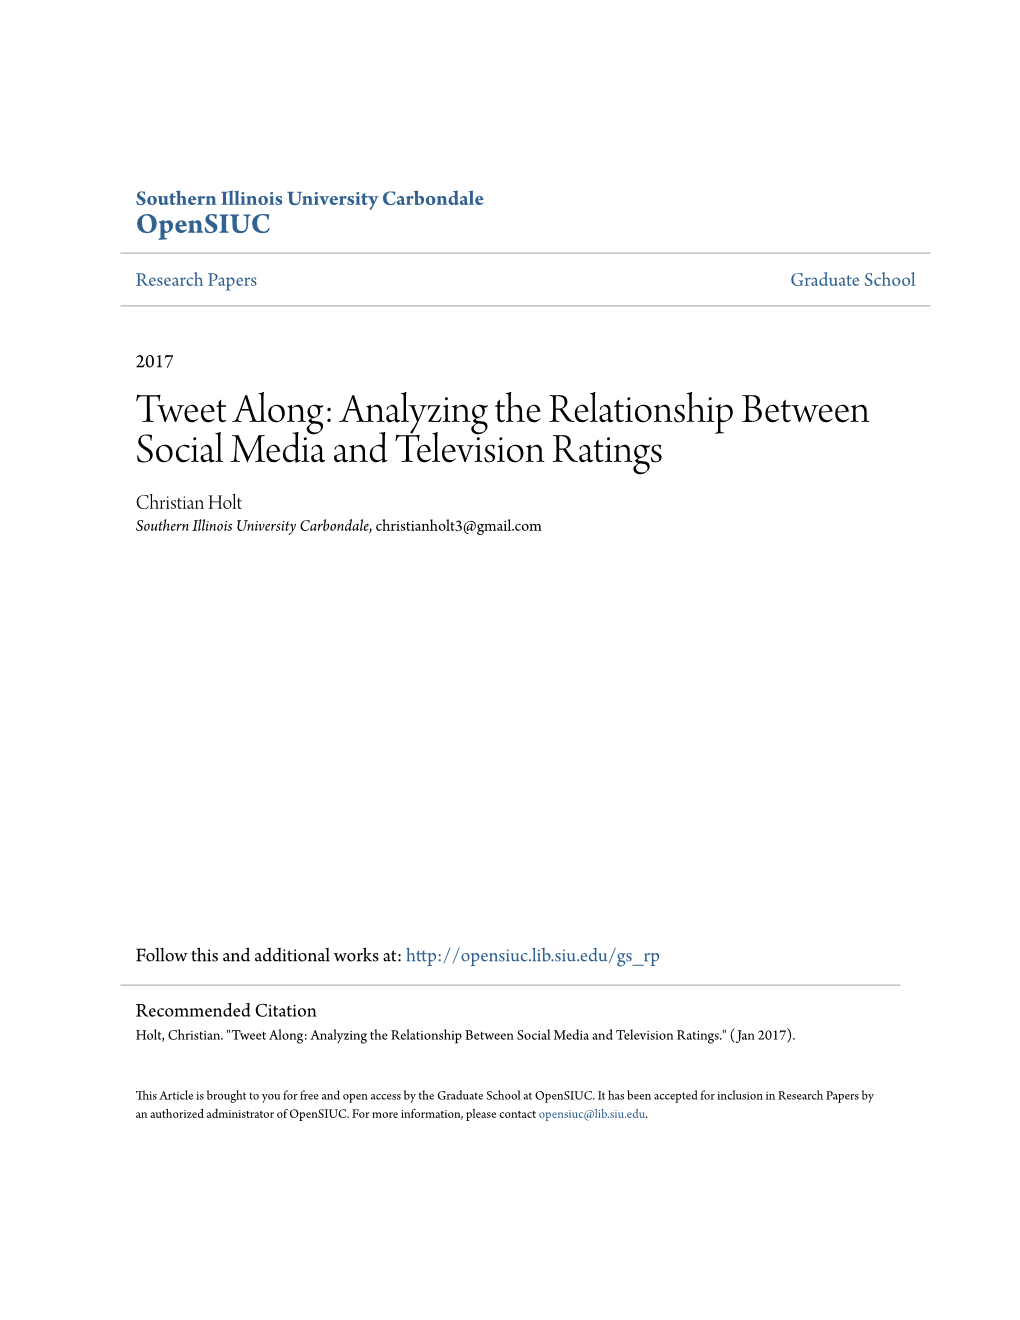 Analyzing the Relationship Between Social Media and Television Ratings Christian Holt Southern Illinois University Carbondale, Christianholt3@Gmail.Com